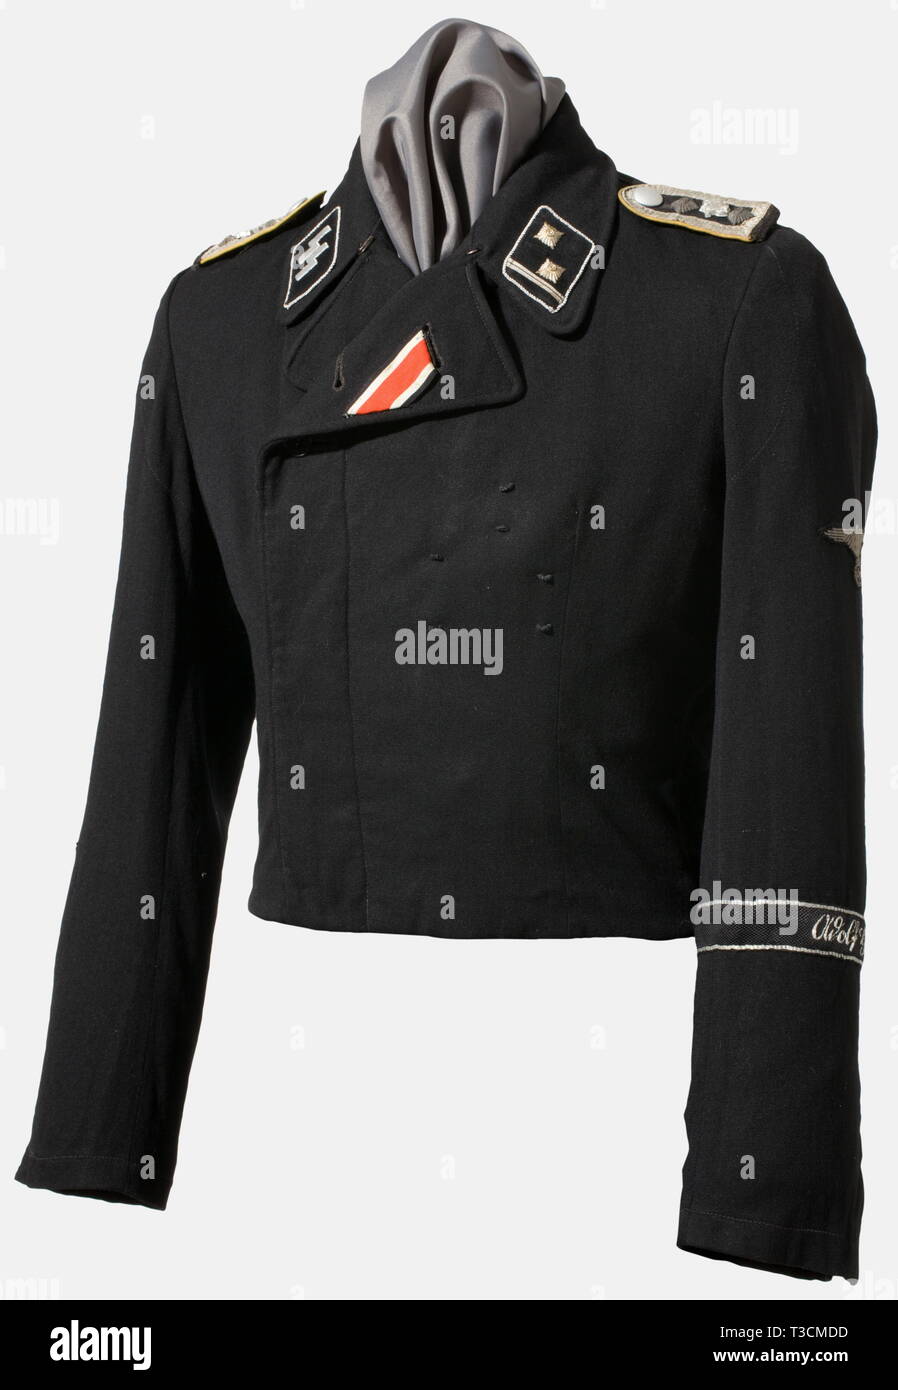 A field tunic for a Hauptscharführer, with the Armoured Reconnaissance Battalion of the SS-Leibstandarte 'Adolf Hitler' Black wool panzer troop uniform tunic, with black lining (repaired in places, added selvage). Black synthetic resin buttons (various). Iron Cross buttonhole ribbon and medal loops, Black collar patches with silver piping for an SS-officer, the right with silver embroidered runes, the left with metal stars (upgraded) and rank lace. Black felt sleeve mounted shoulder boards, with black net backing, silver lace, golden yellow piping, and the rare small versio, Editorial-Use-Only Stock Photo